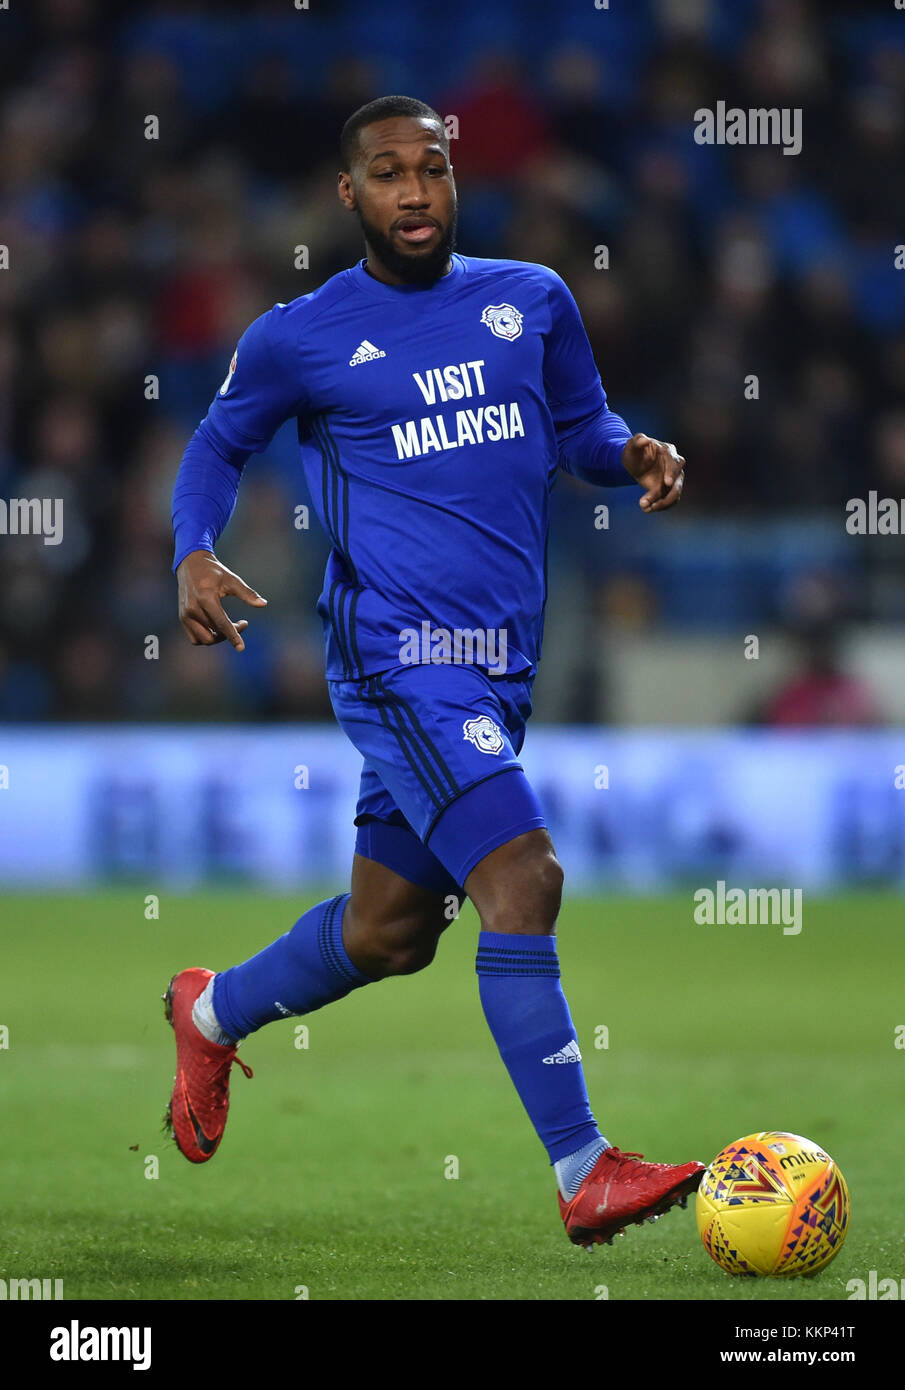 Cardiff City's Junior Hoilett during the Sky Bet Championship match at the Cardiff City Stadium, Cardiff. PRESS ASSOCIATION Photo Picture date: Friday December 1, 2017. See PA story SOCCER Cardiff. Photo credit should read: Simon Galloway/PA Wire. RESTICTIONS: EDITORIAL USE ONLY No use with unauthorised audio, video, data, fixture lists, club/league logos or 'live' services. Online in-match use limited to 75 images, no video emulation. No use in betting, games or single club/league/player publications. Stock Photo